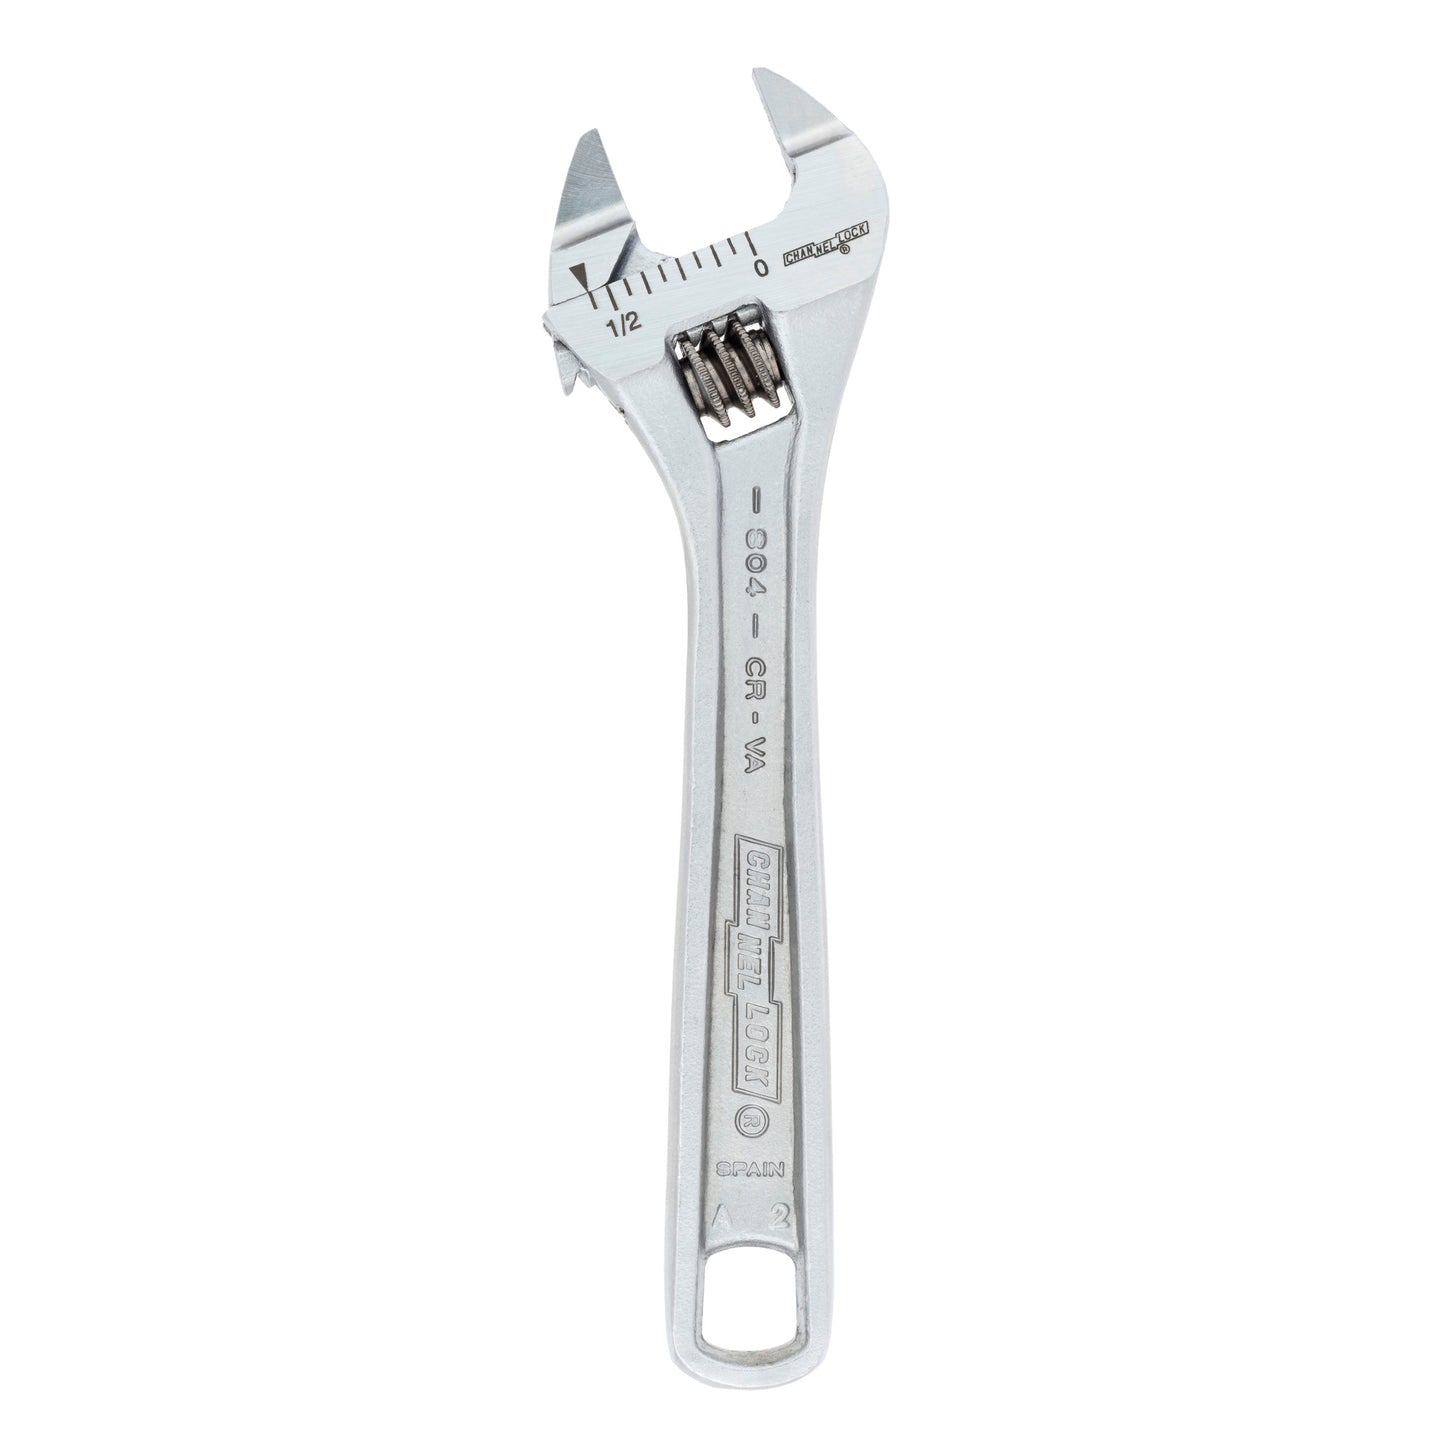 4-inch Extra Slim Jaw Adjustable Wrench (804S)